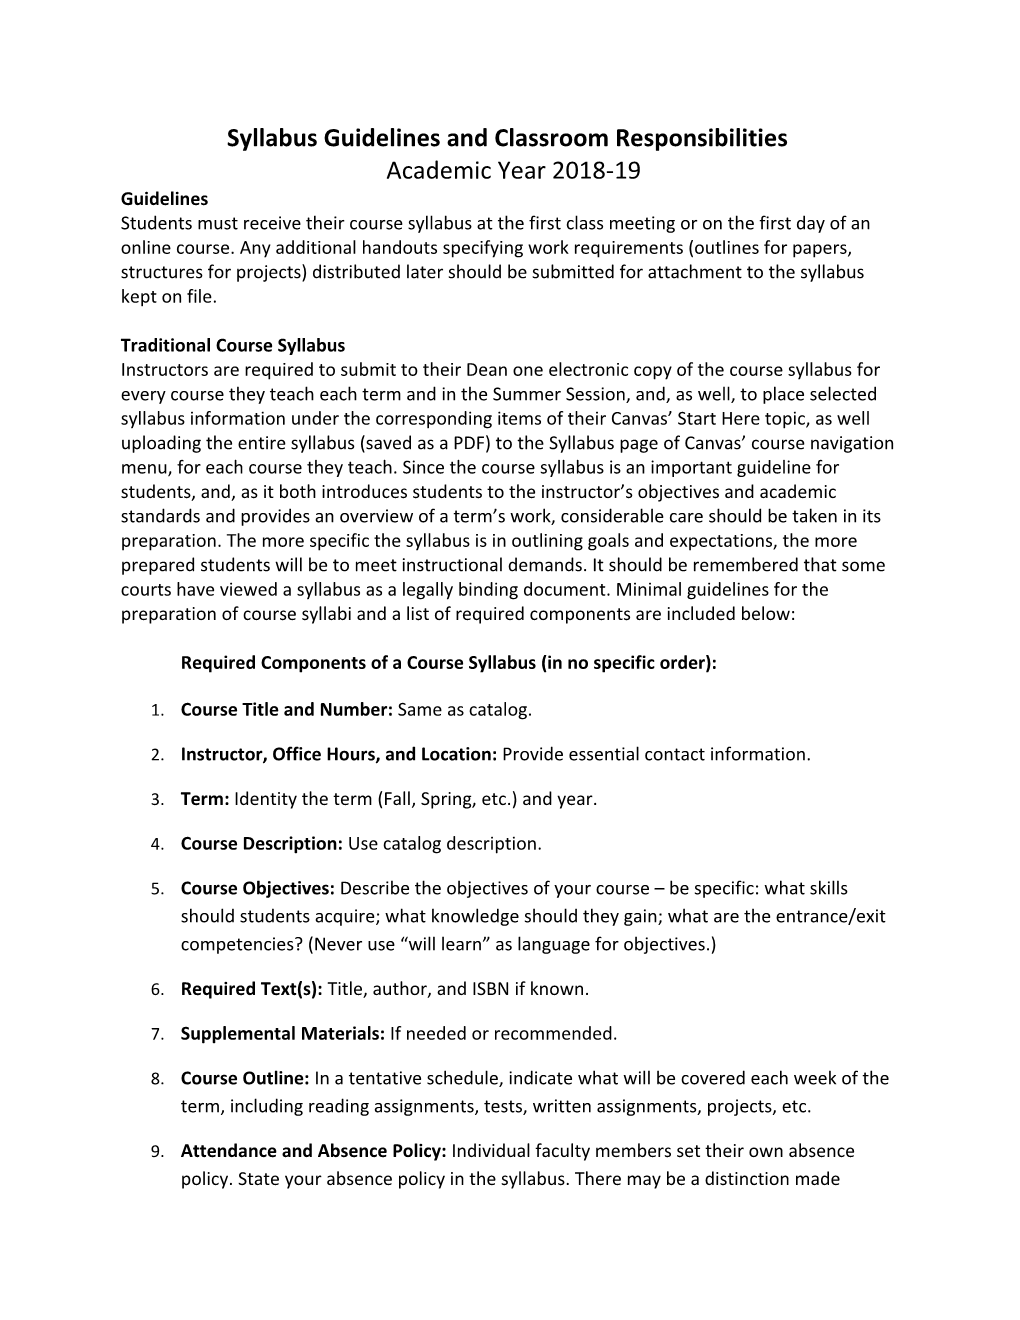 Syllabus Guidelines and Classroom Responsibilities Academic Year 2018-19